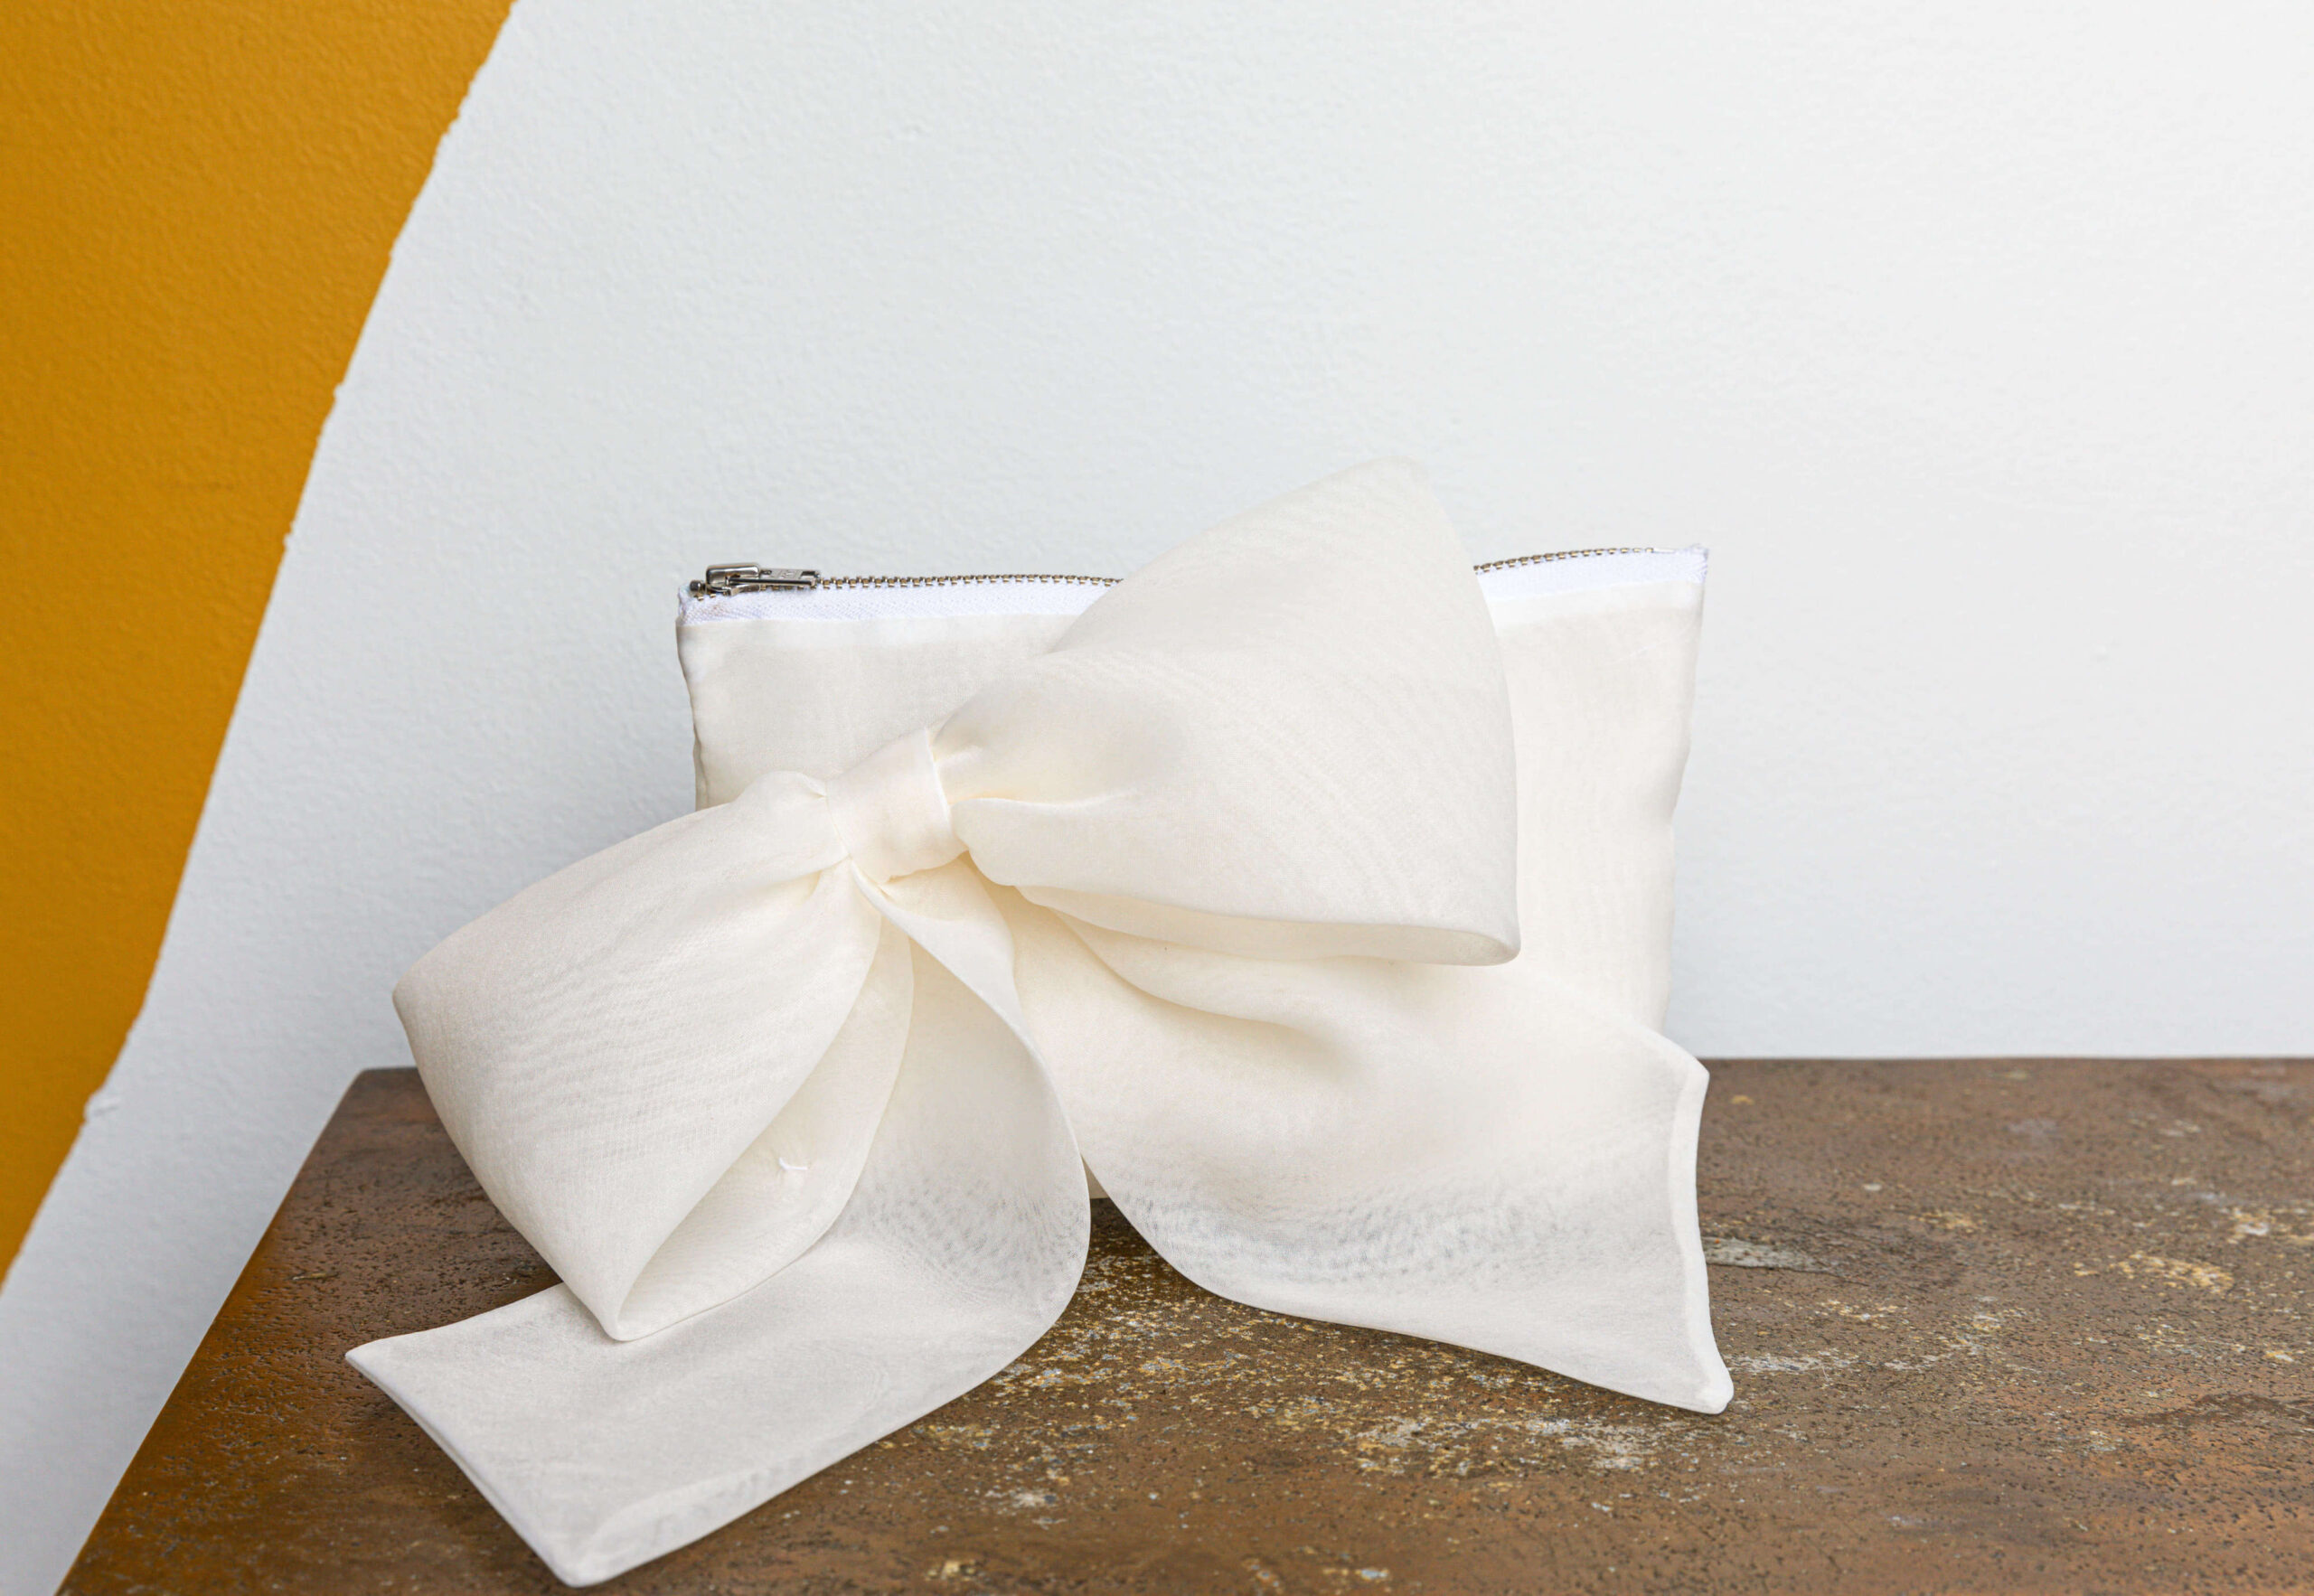 A classic rectangle shaped clutch in organza, featuring an elegant bow detail on the front.